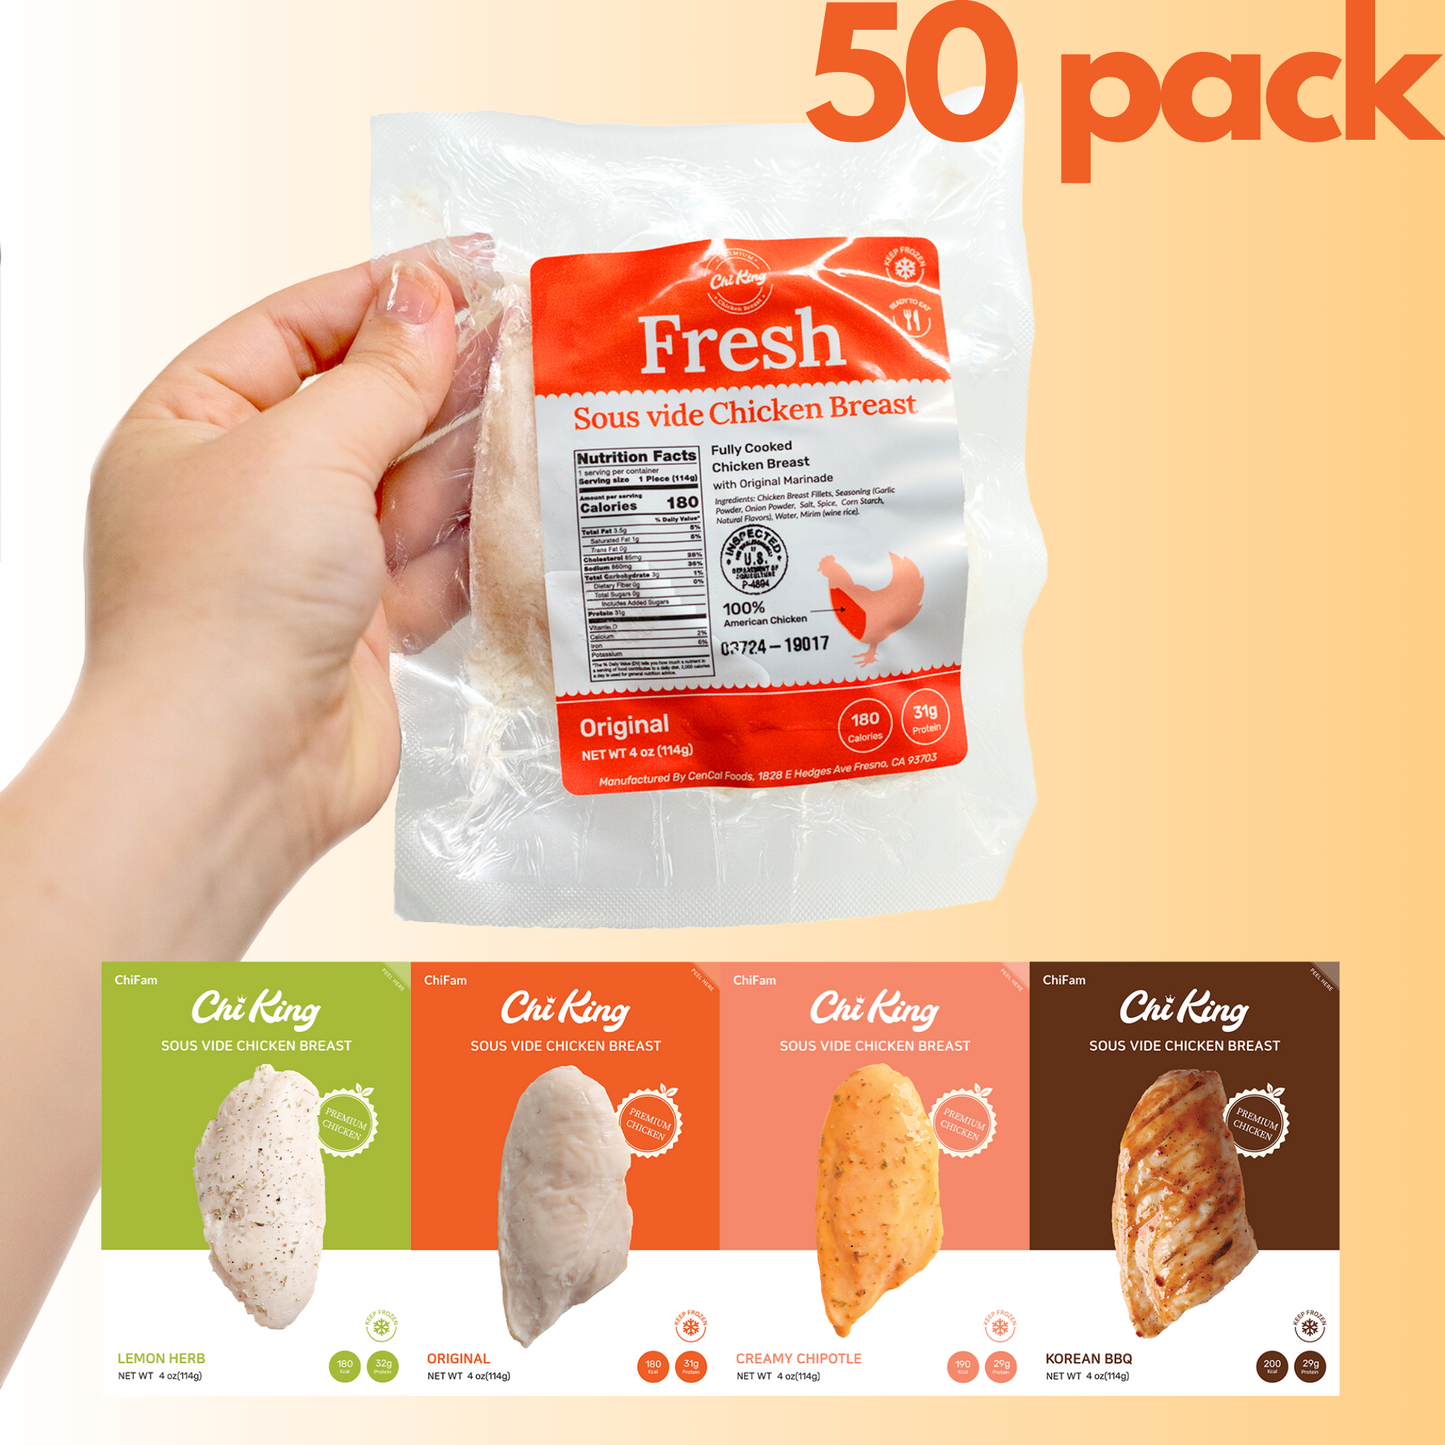 50 Pack Sous Vide Chicken Breast Box